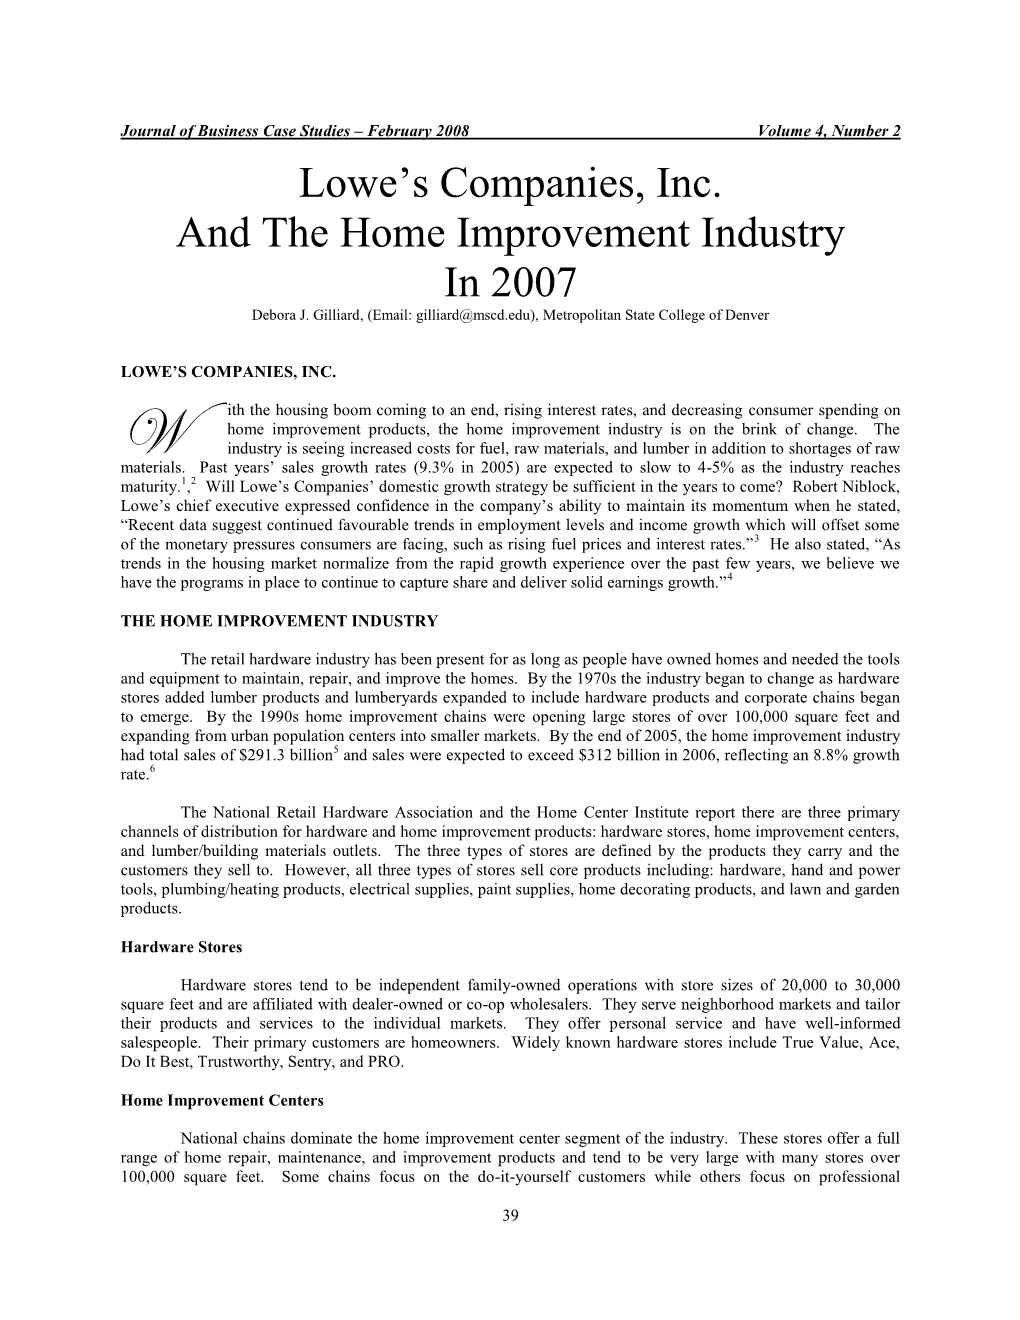 Lowe‟S Companies, Inc. and the Home Improvement Industry in 2007 Debora J